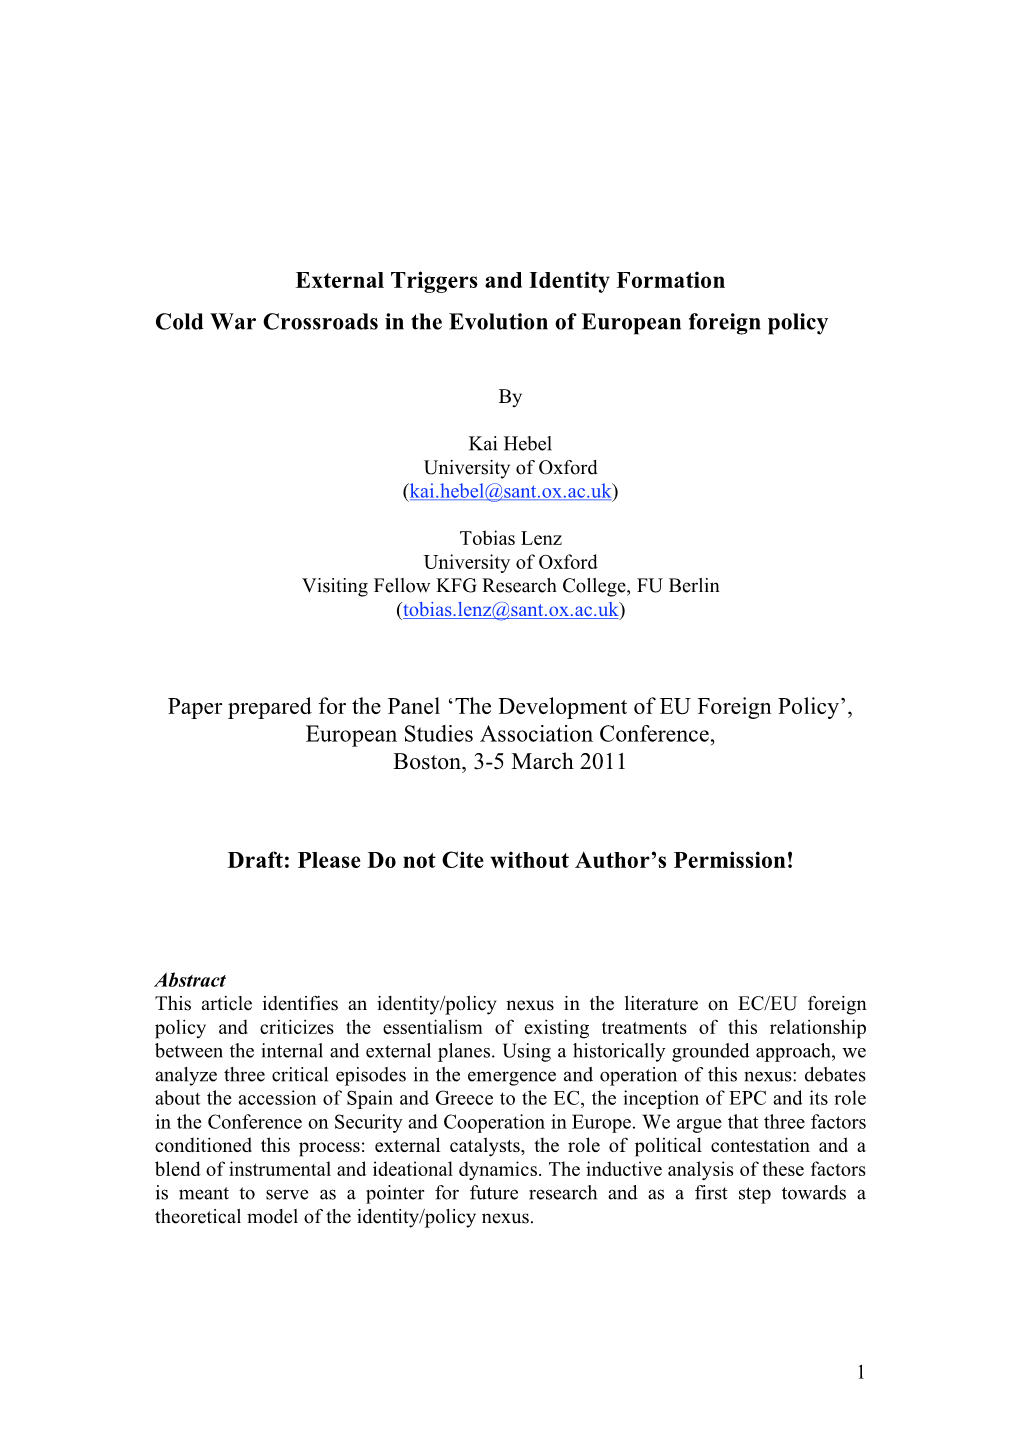 External Triggers and Identity Formation Cold War Crossroads in the Evolution of European Foreign Policy Paper Prepared For